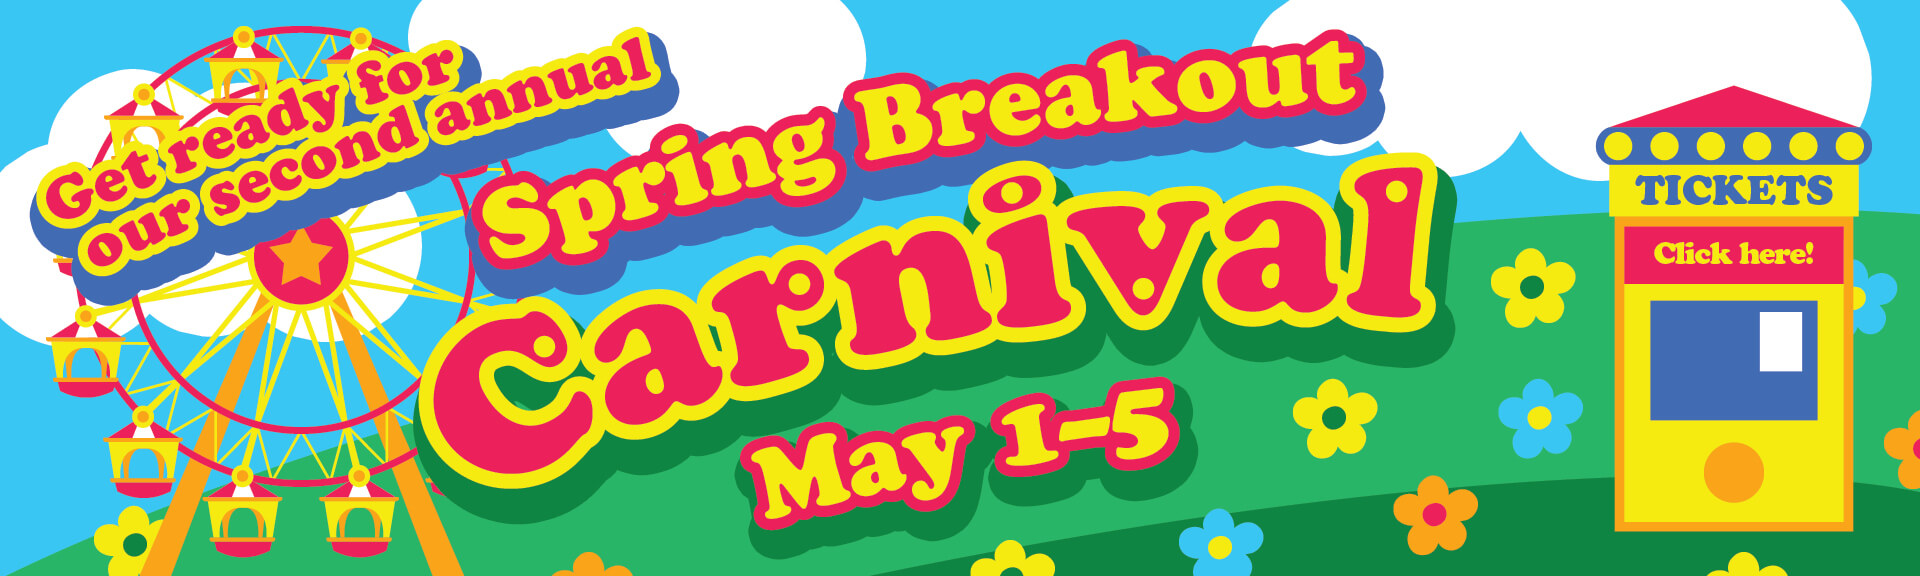 Get ready for our second annual Spring Breakout Carnival! May 1–5. Tickets: Click here!